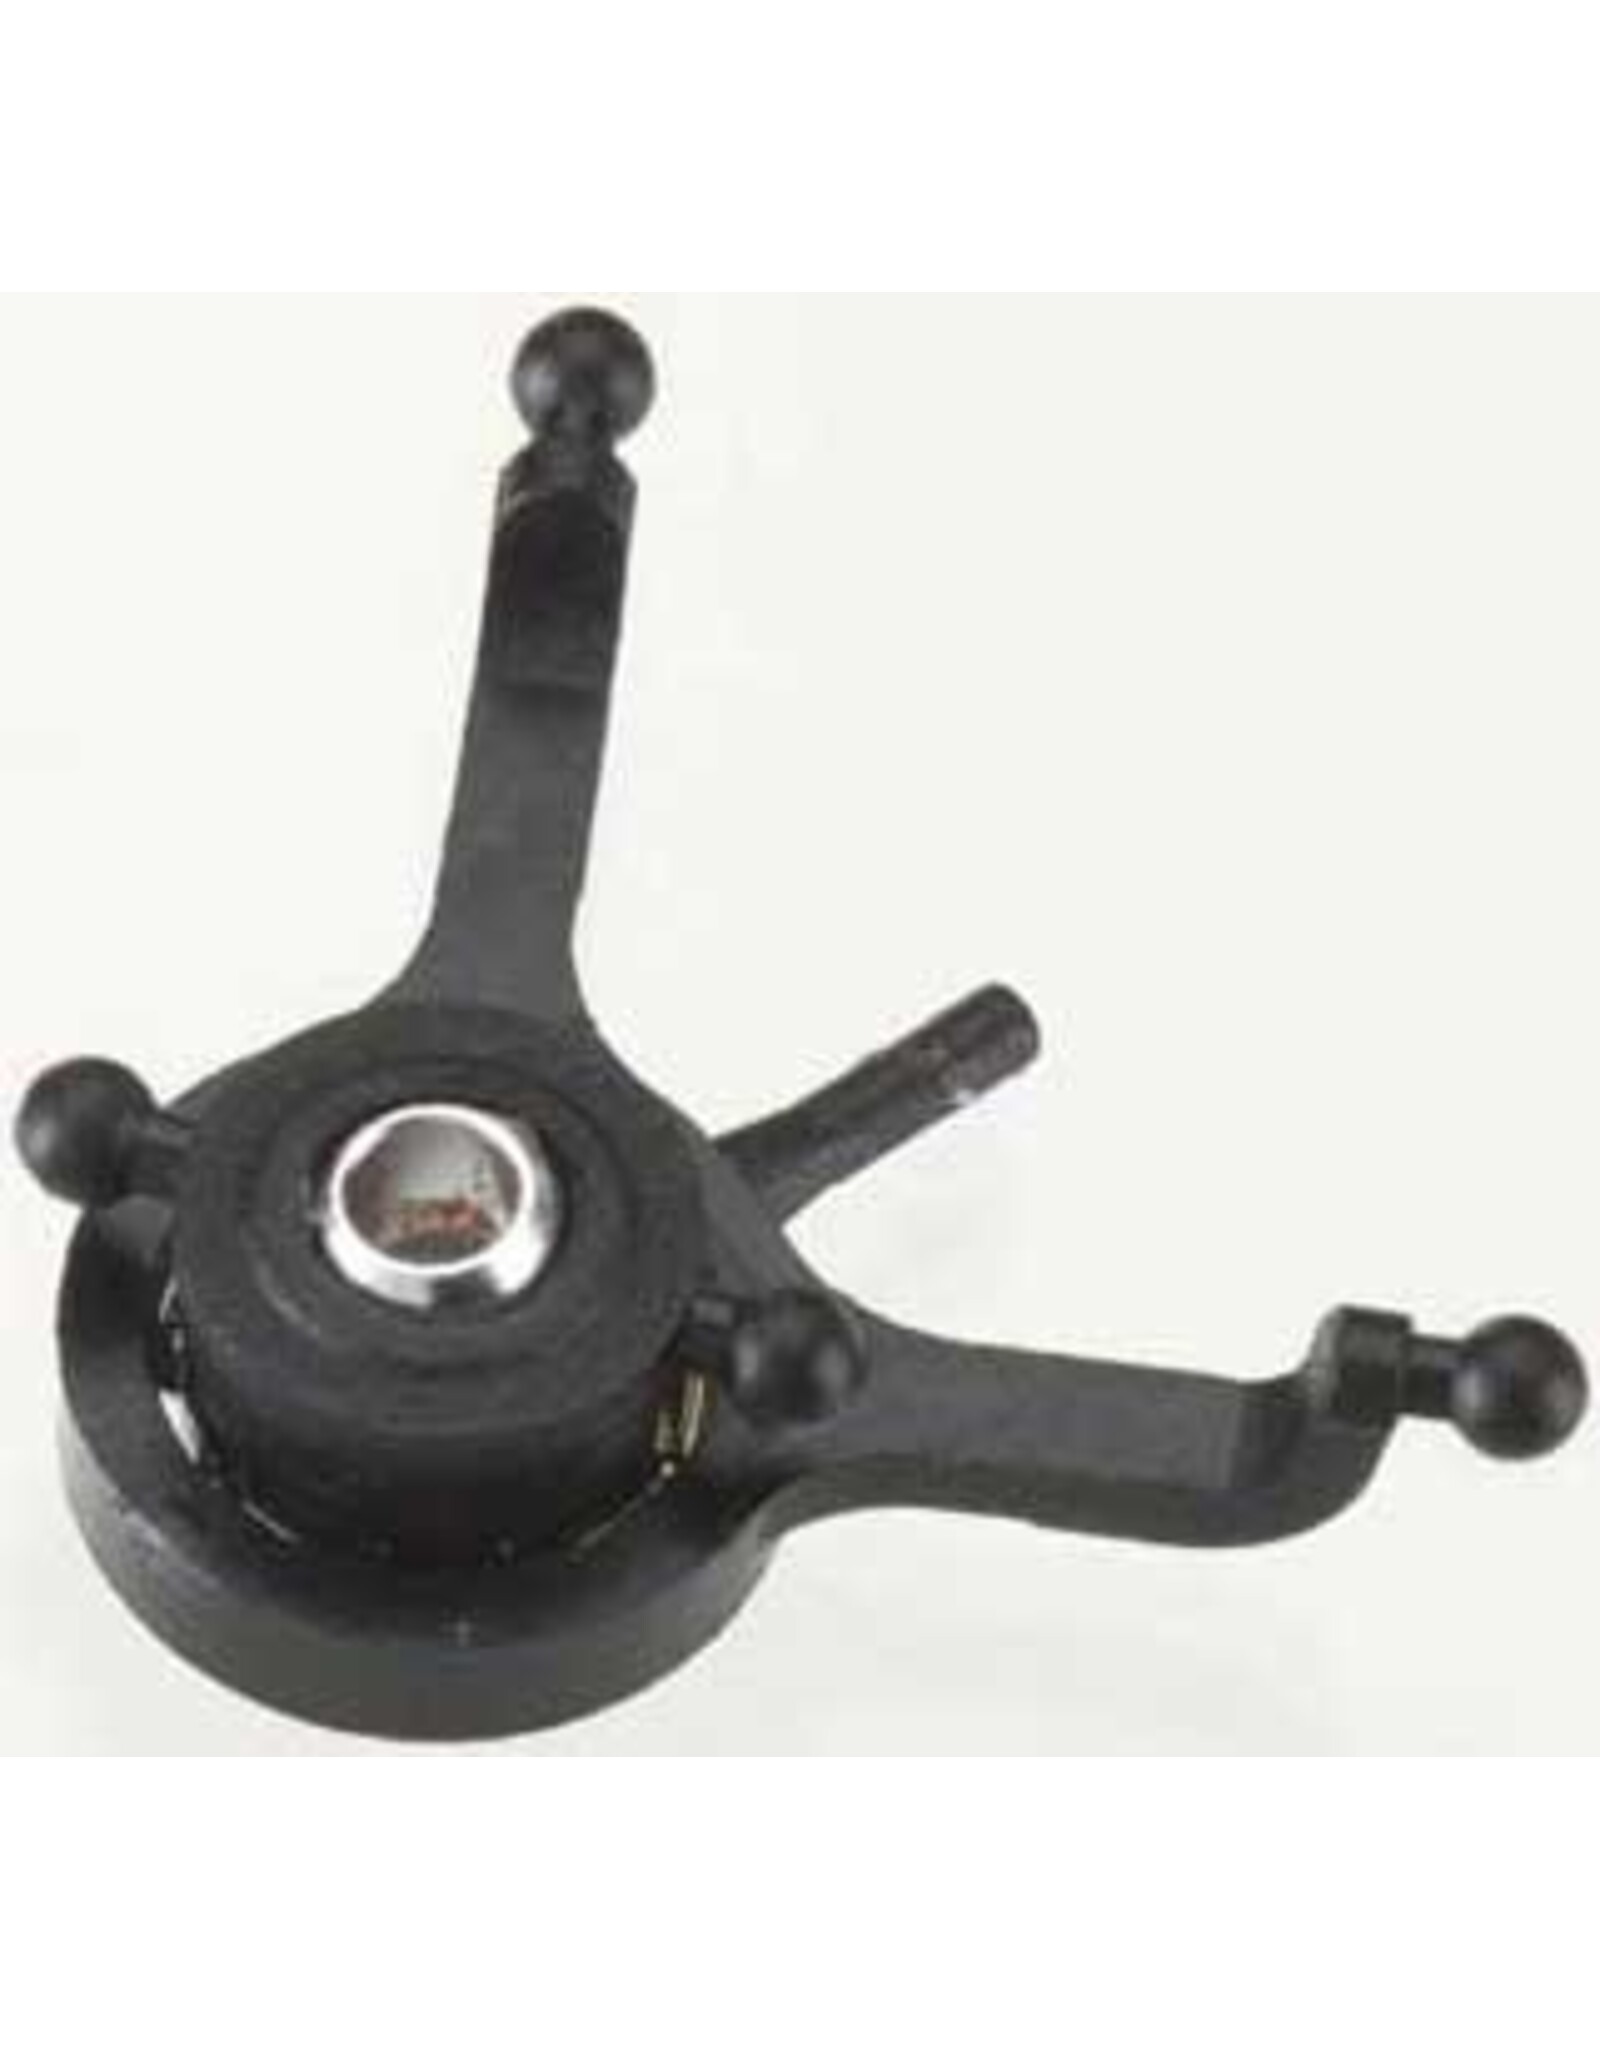 Heli-Max Swashplate Assembly AXE CX MICRO